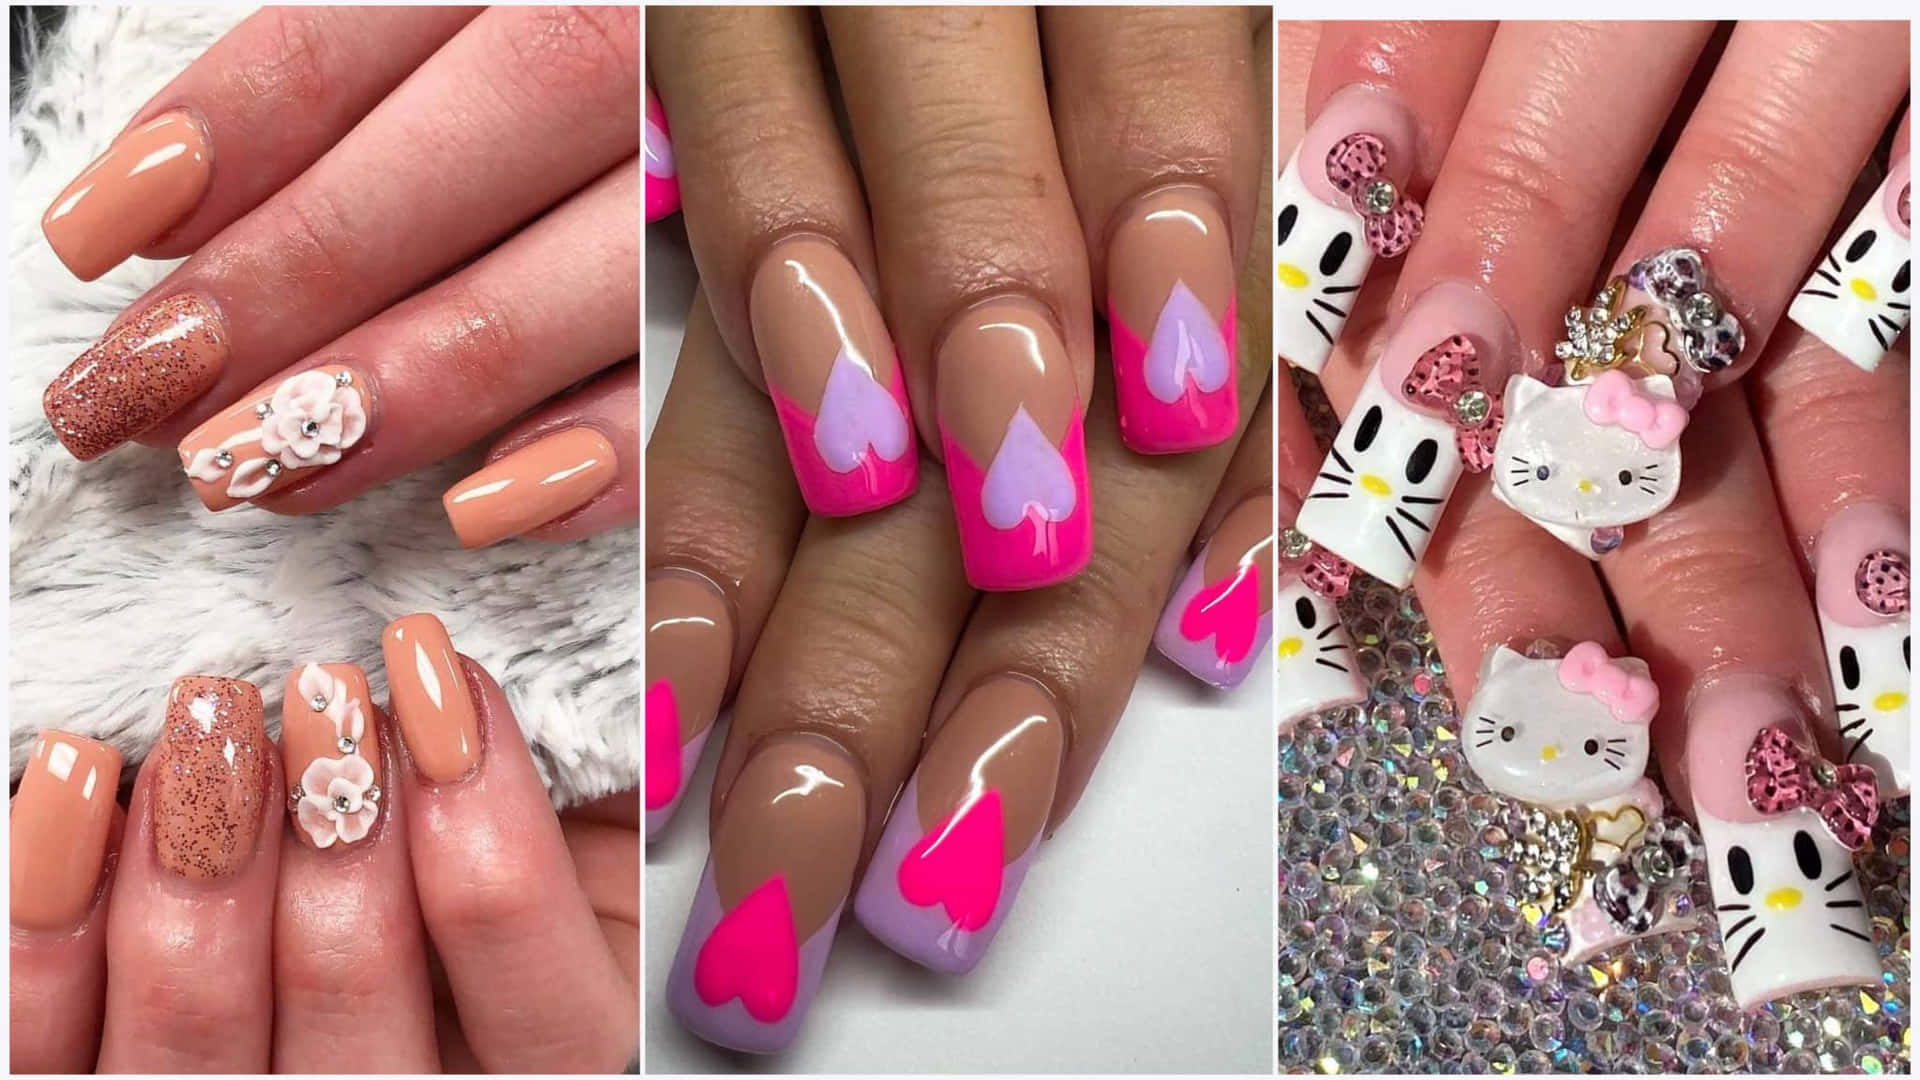 Get the Look You Crave with Faux Nails!